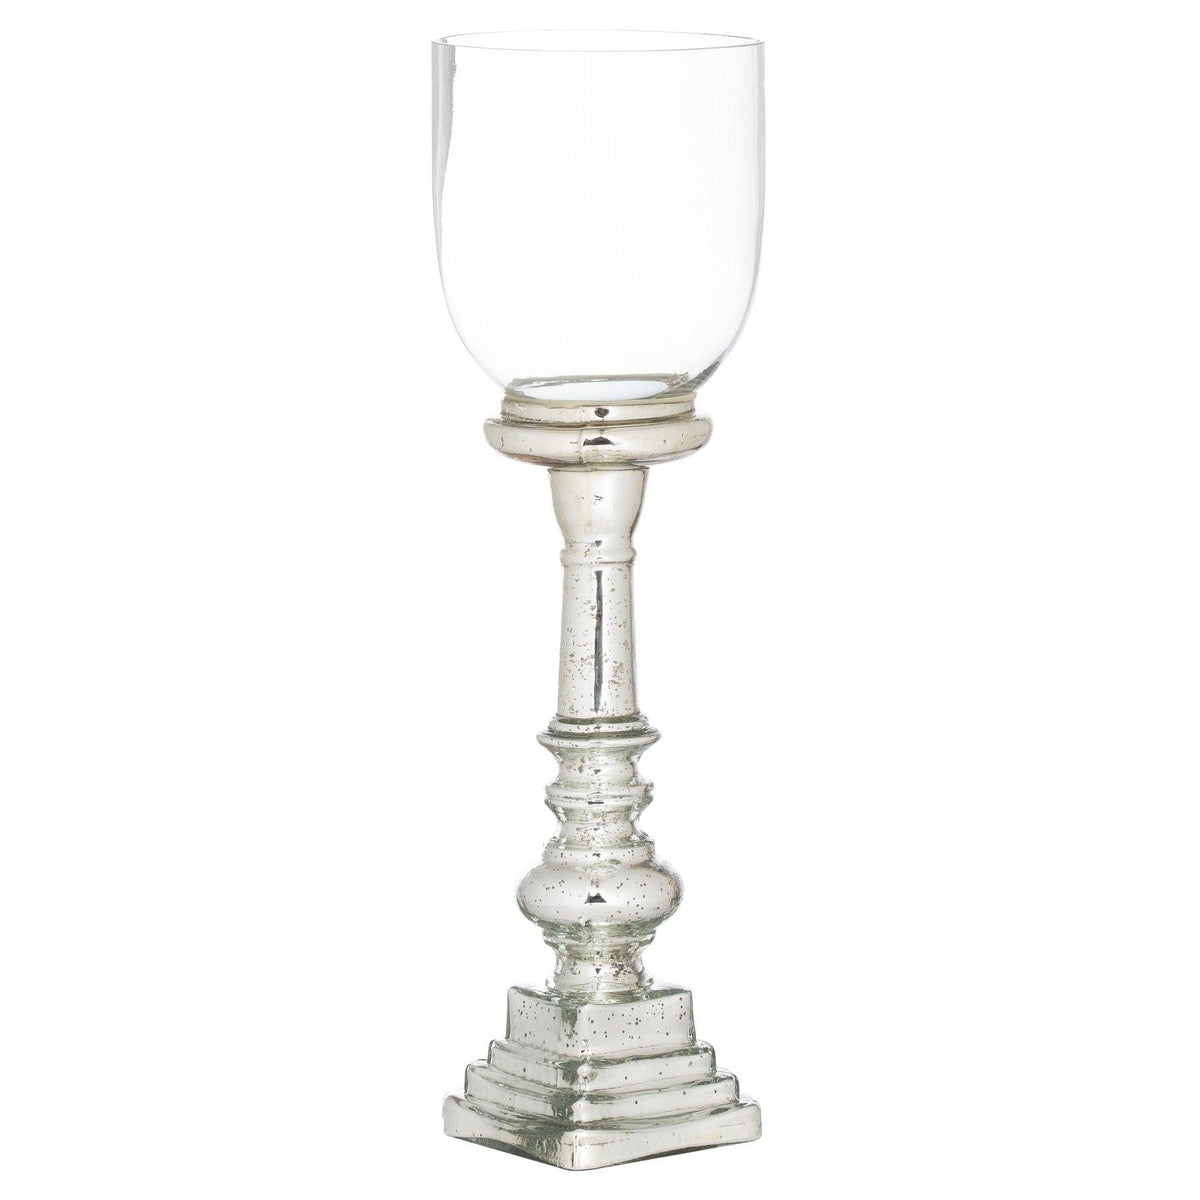 Mercury Effect Glass Top Tall Candle Pillar Holder - Vookoo Lifestyle